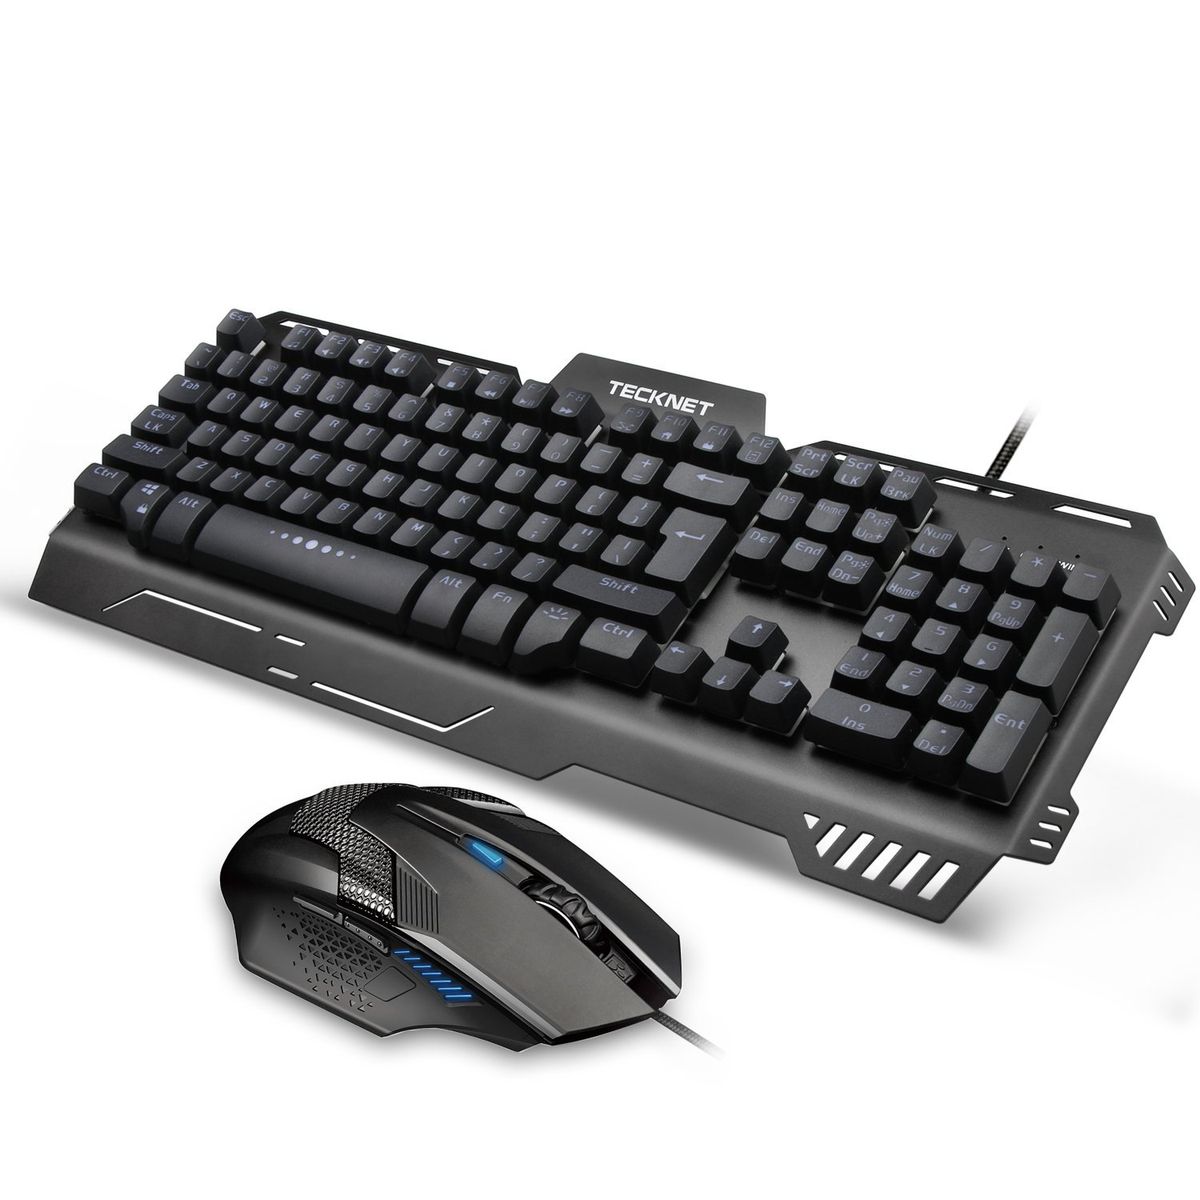 Perfect Best Gaming Keyboard Mouse Headset Combo Under 2000 with Epic Design ideas